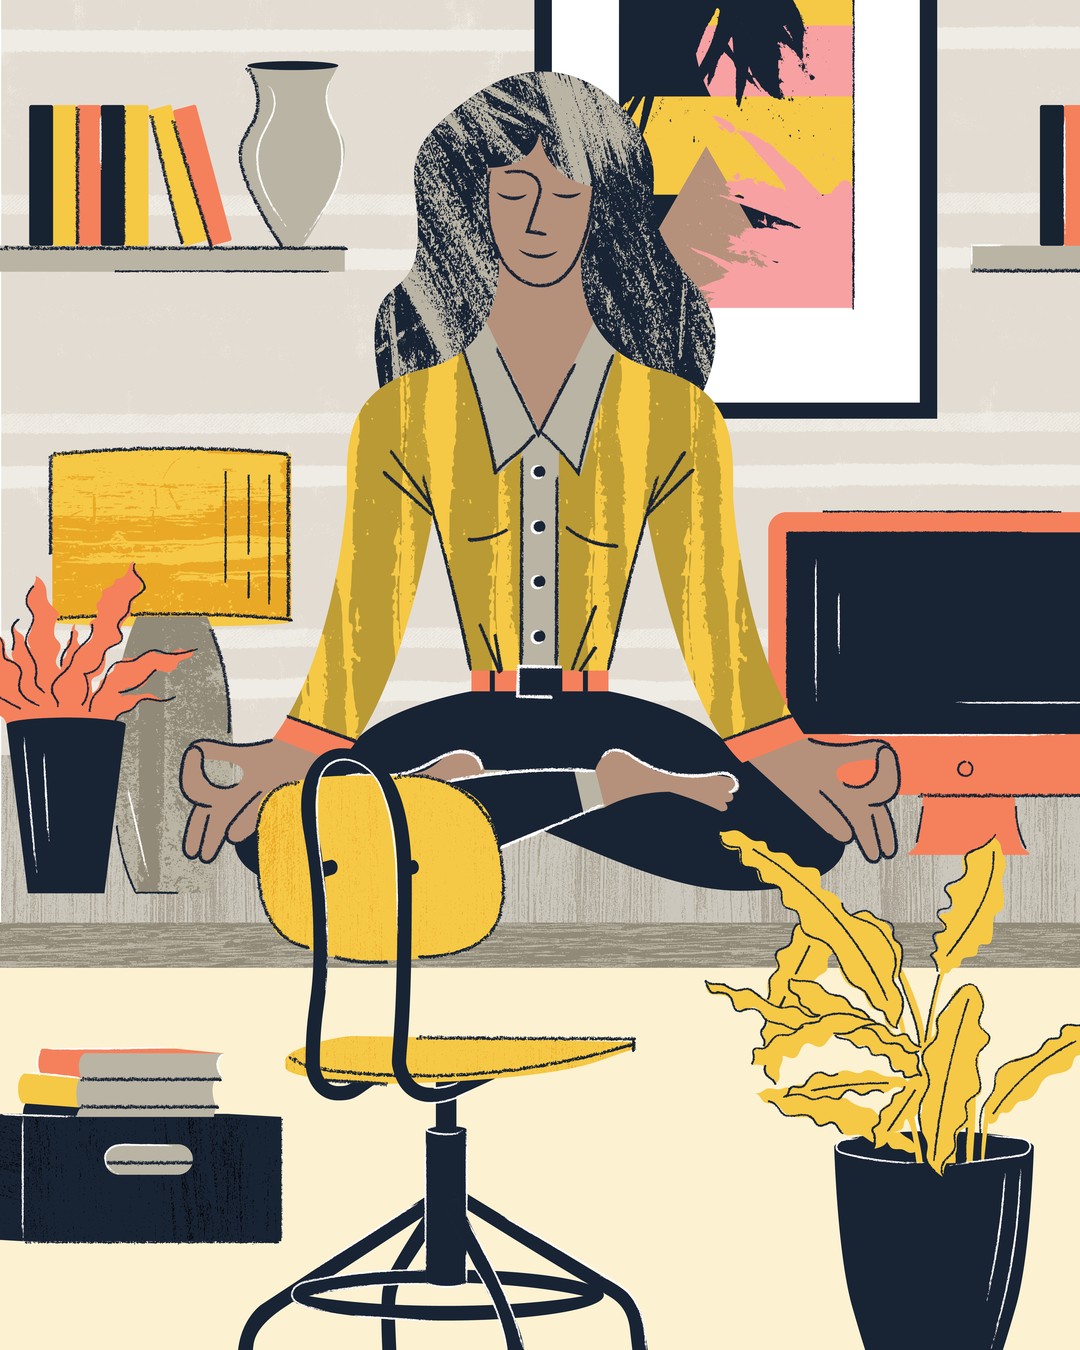 Mindfulness, non-judgemental awareness of one’s thoughts and actions, can be incredibly useful in tough times.  Find out how this simple yet challenging practice can help sharpen your mind and calm your nerves in our latest blog. Link in bio. #WeAreWard Illustration by @joystain.